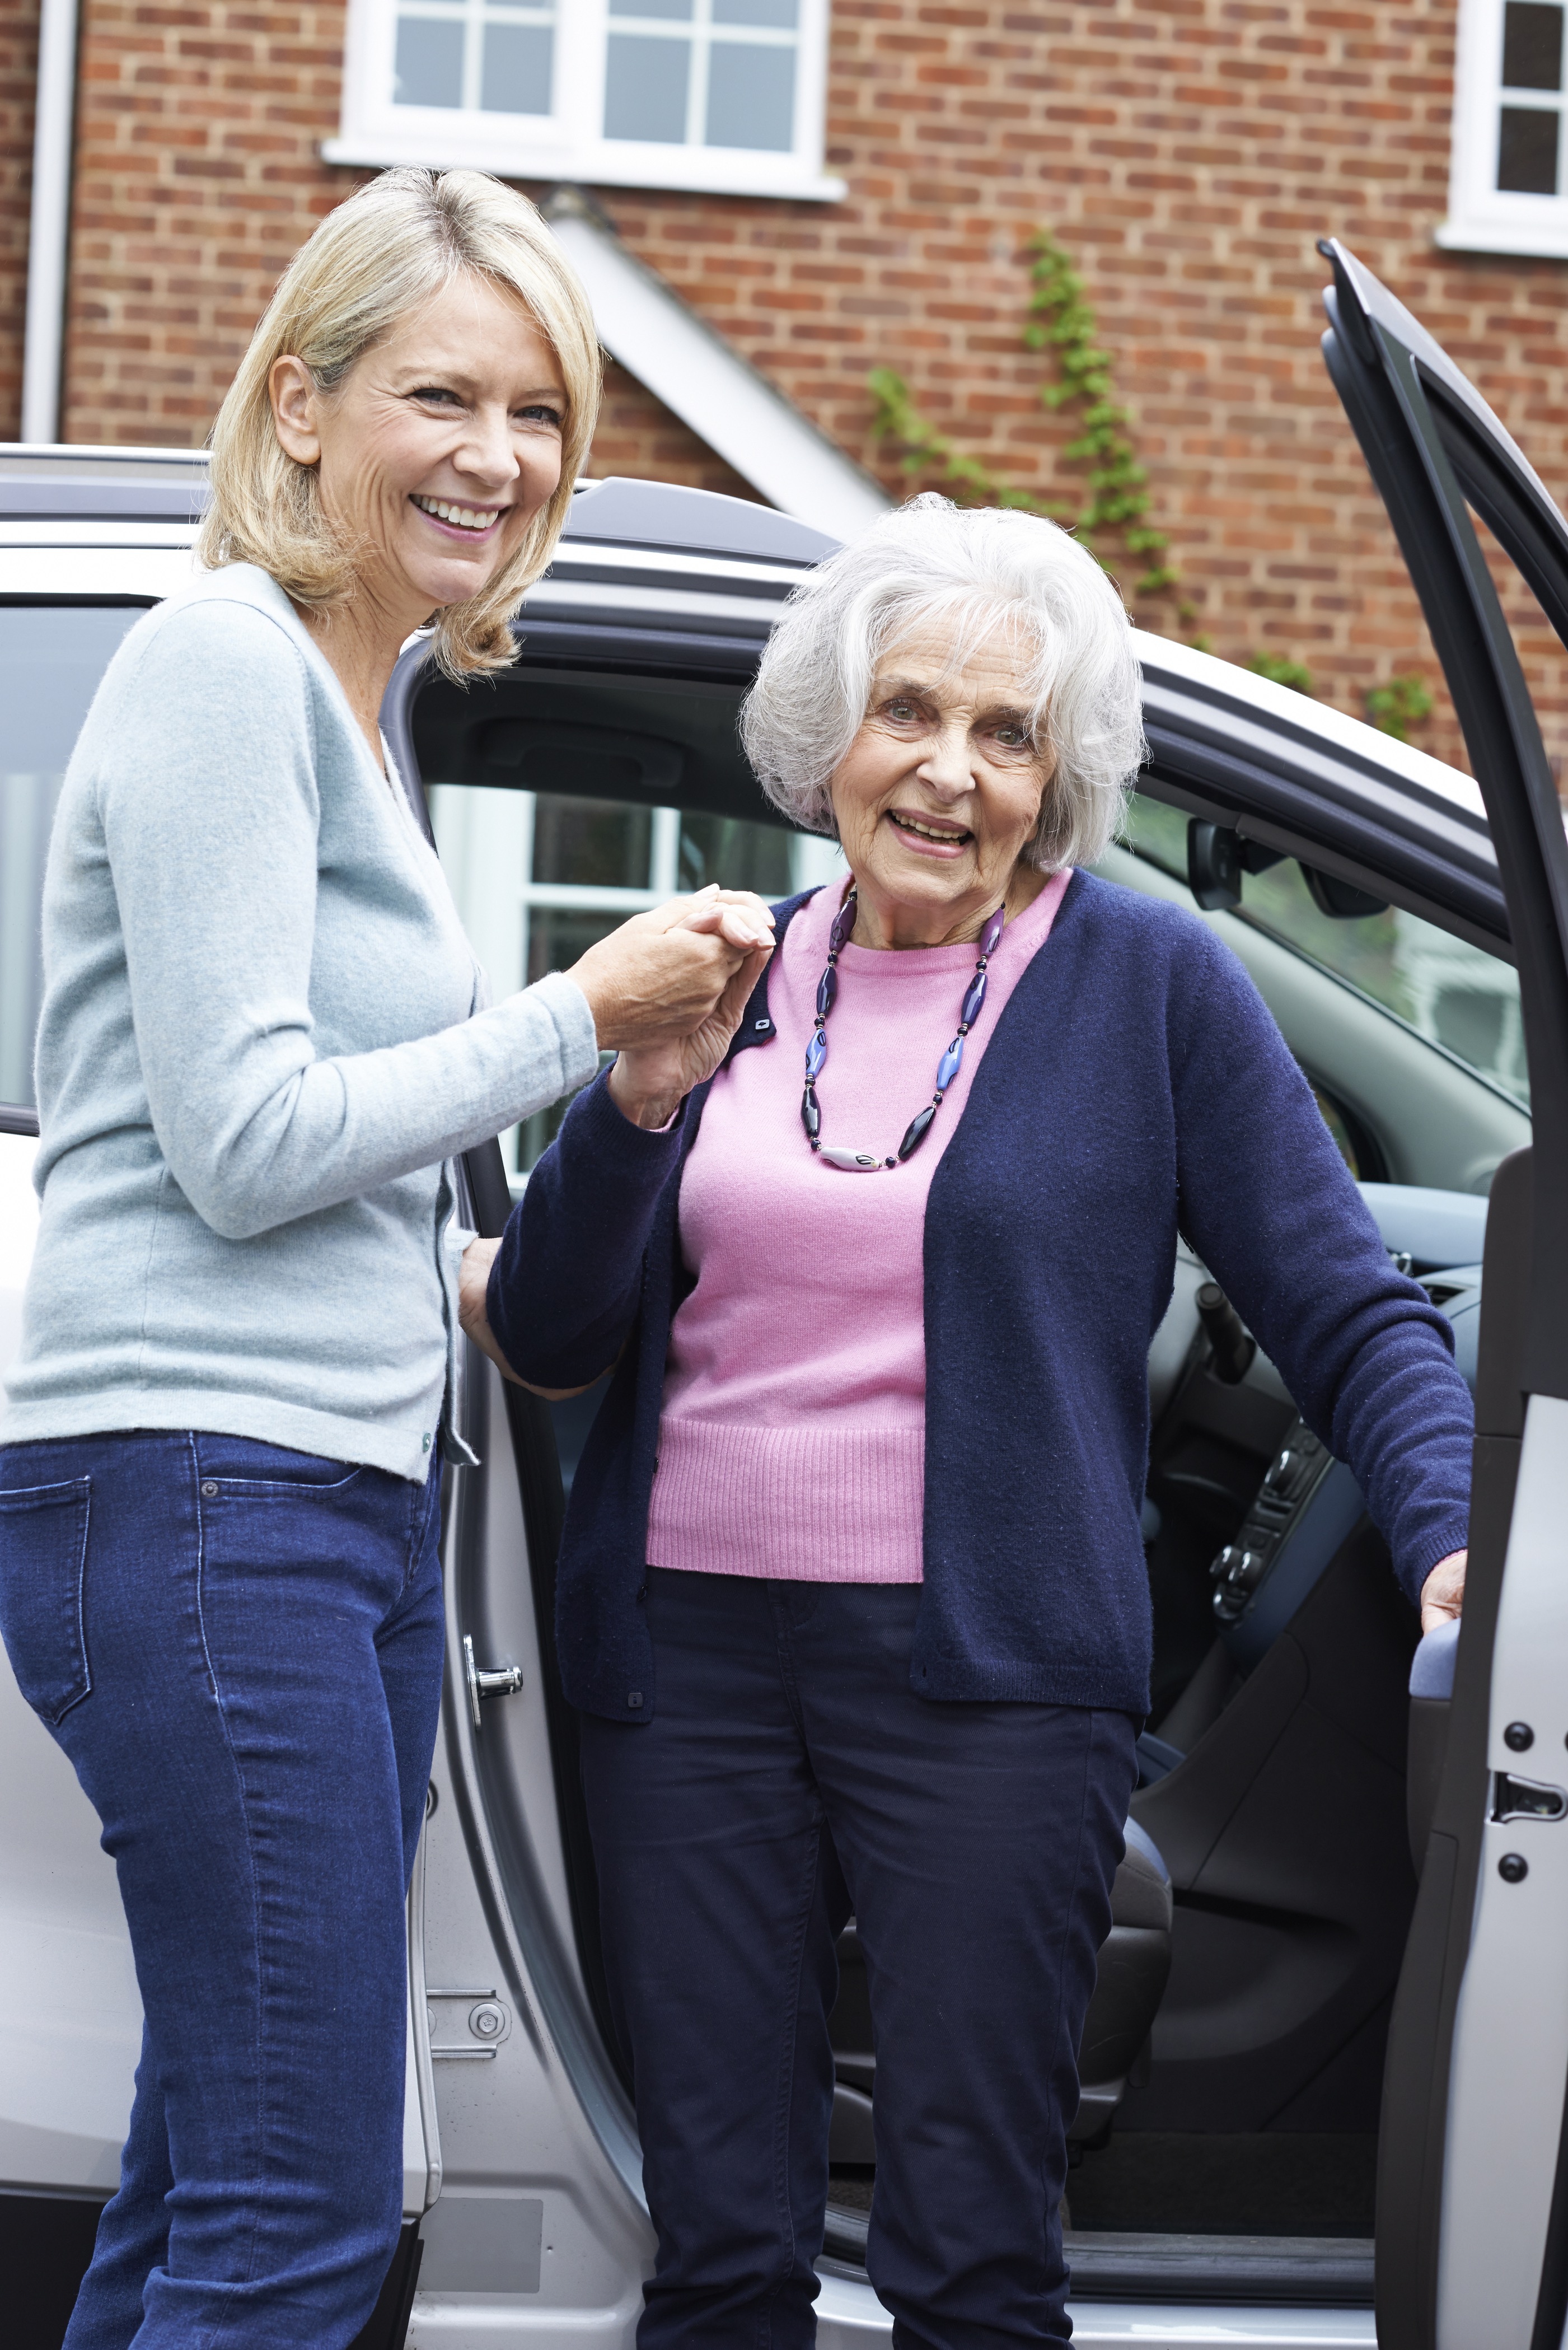 Envoy America Driver Companion helps a client with medical appointment